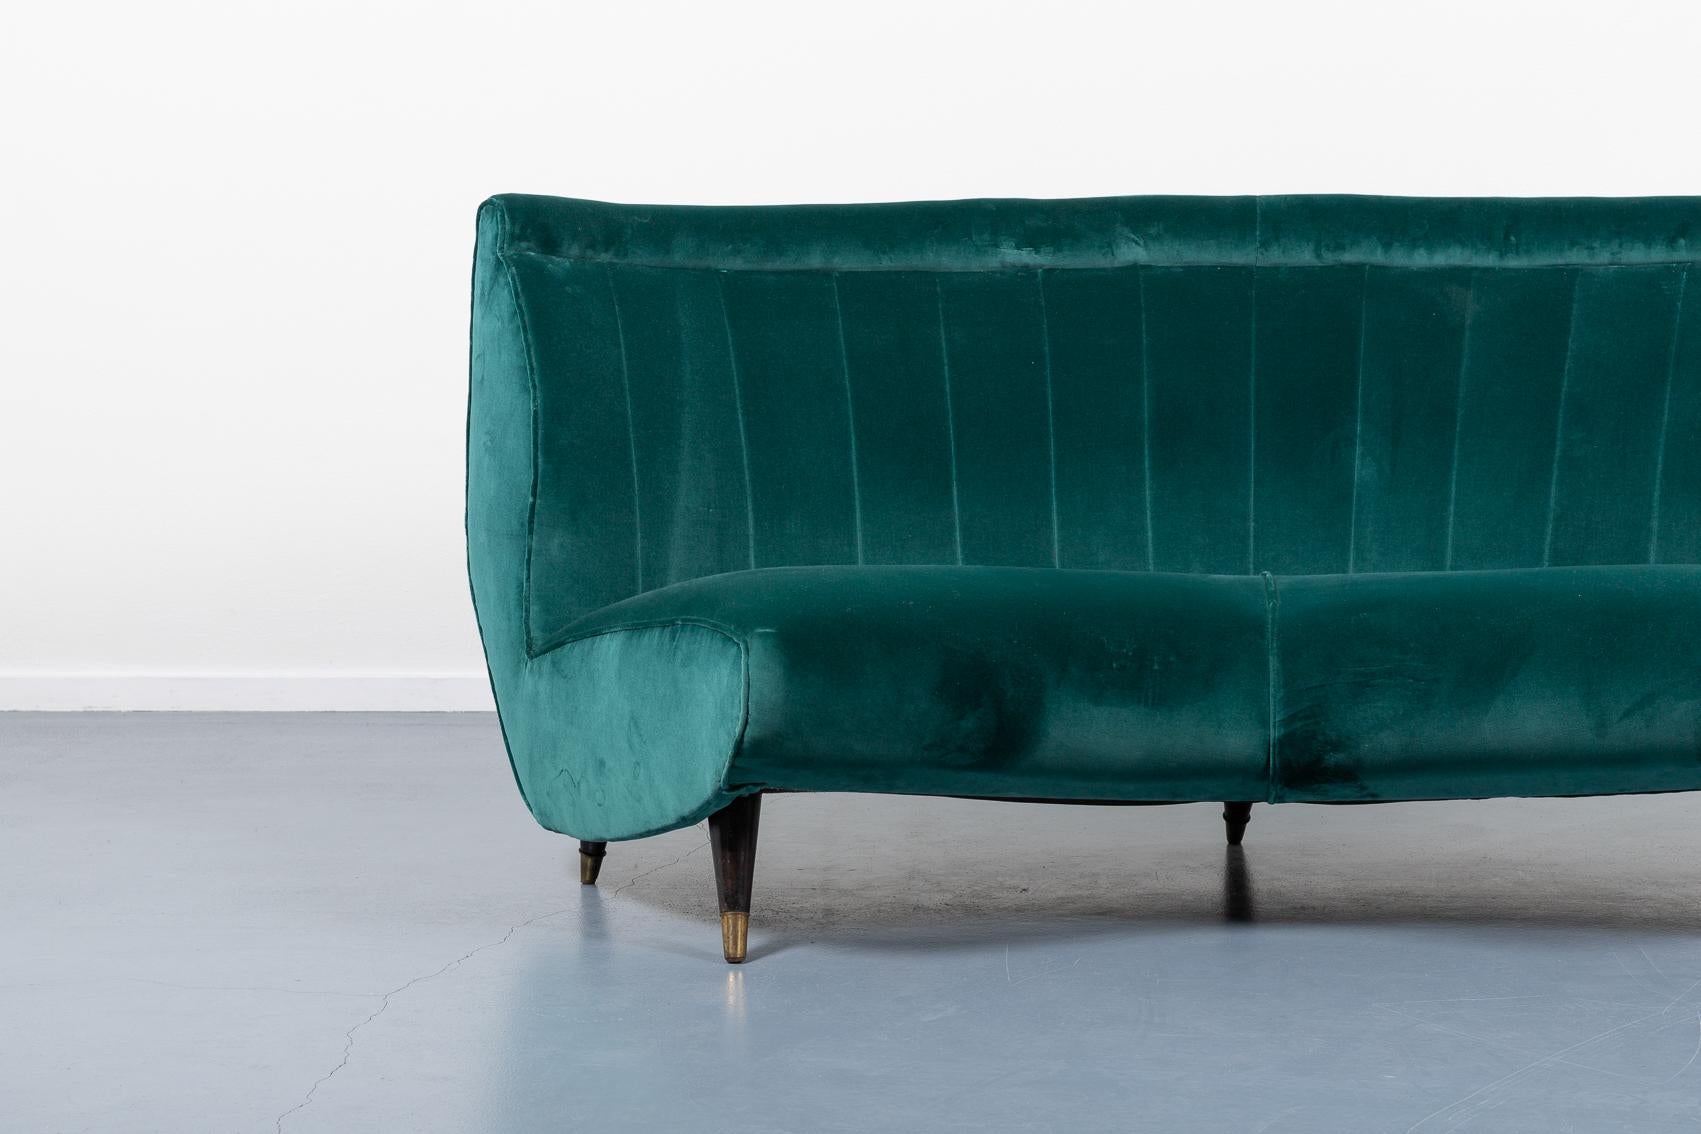 Rare Italian Mid Century Modern curved sofa designed by Guglielmo Veronesi for ISA production. It features sculptural wooden frame with velvet fabric upholstery, leather legs with brass feet.

Condition
Good, later upholstery

Dimensions
width: